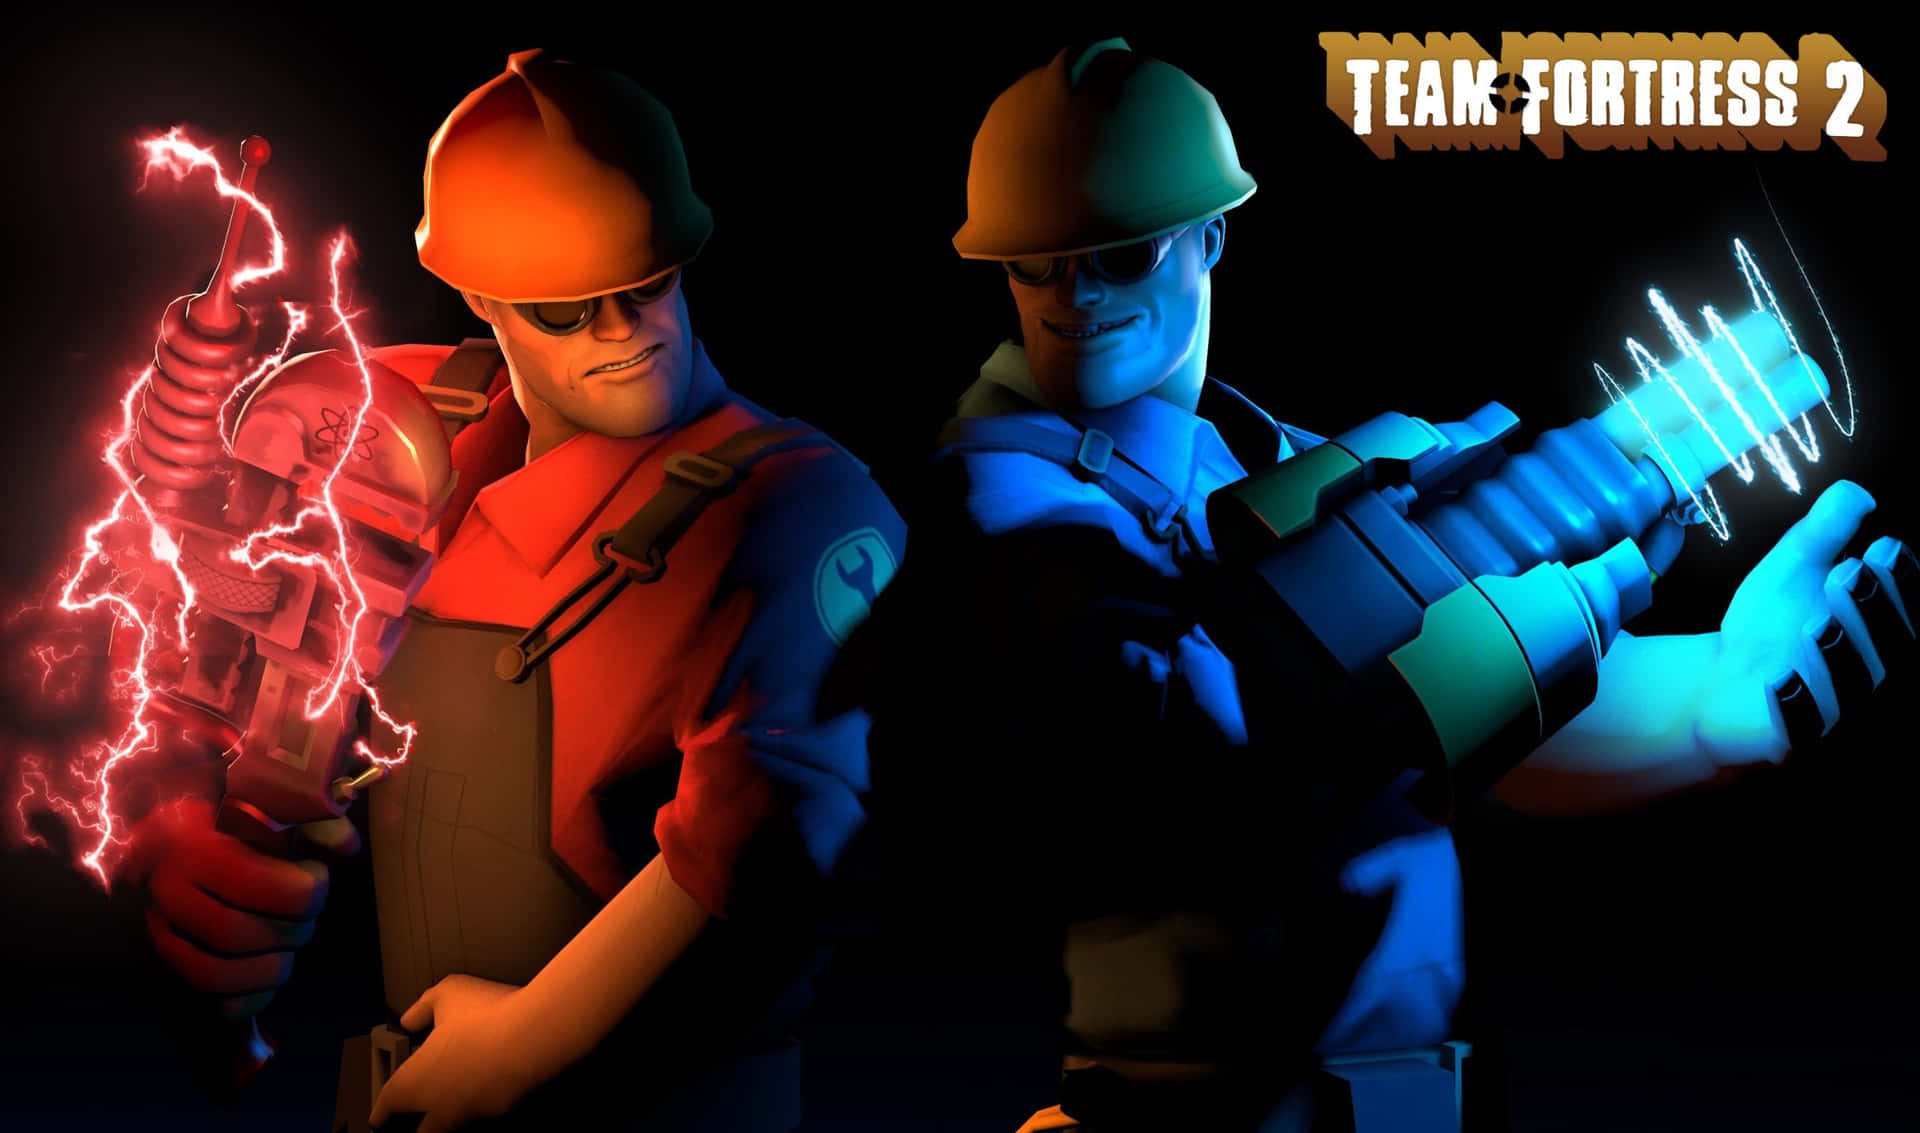 Exciting Team Fortress 2 (TF2) Wallpaper with Vibrant Colors